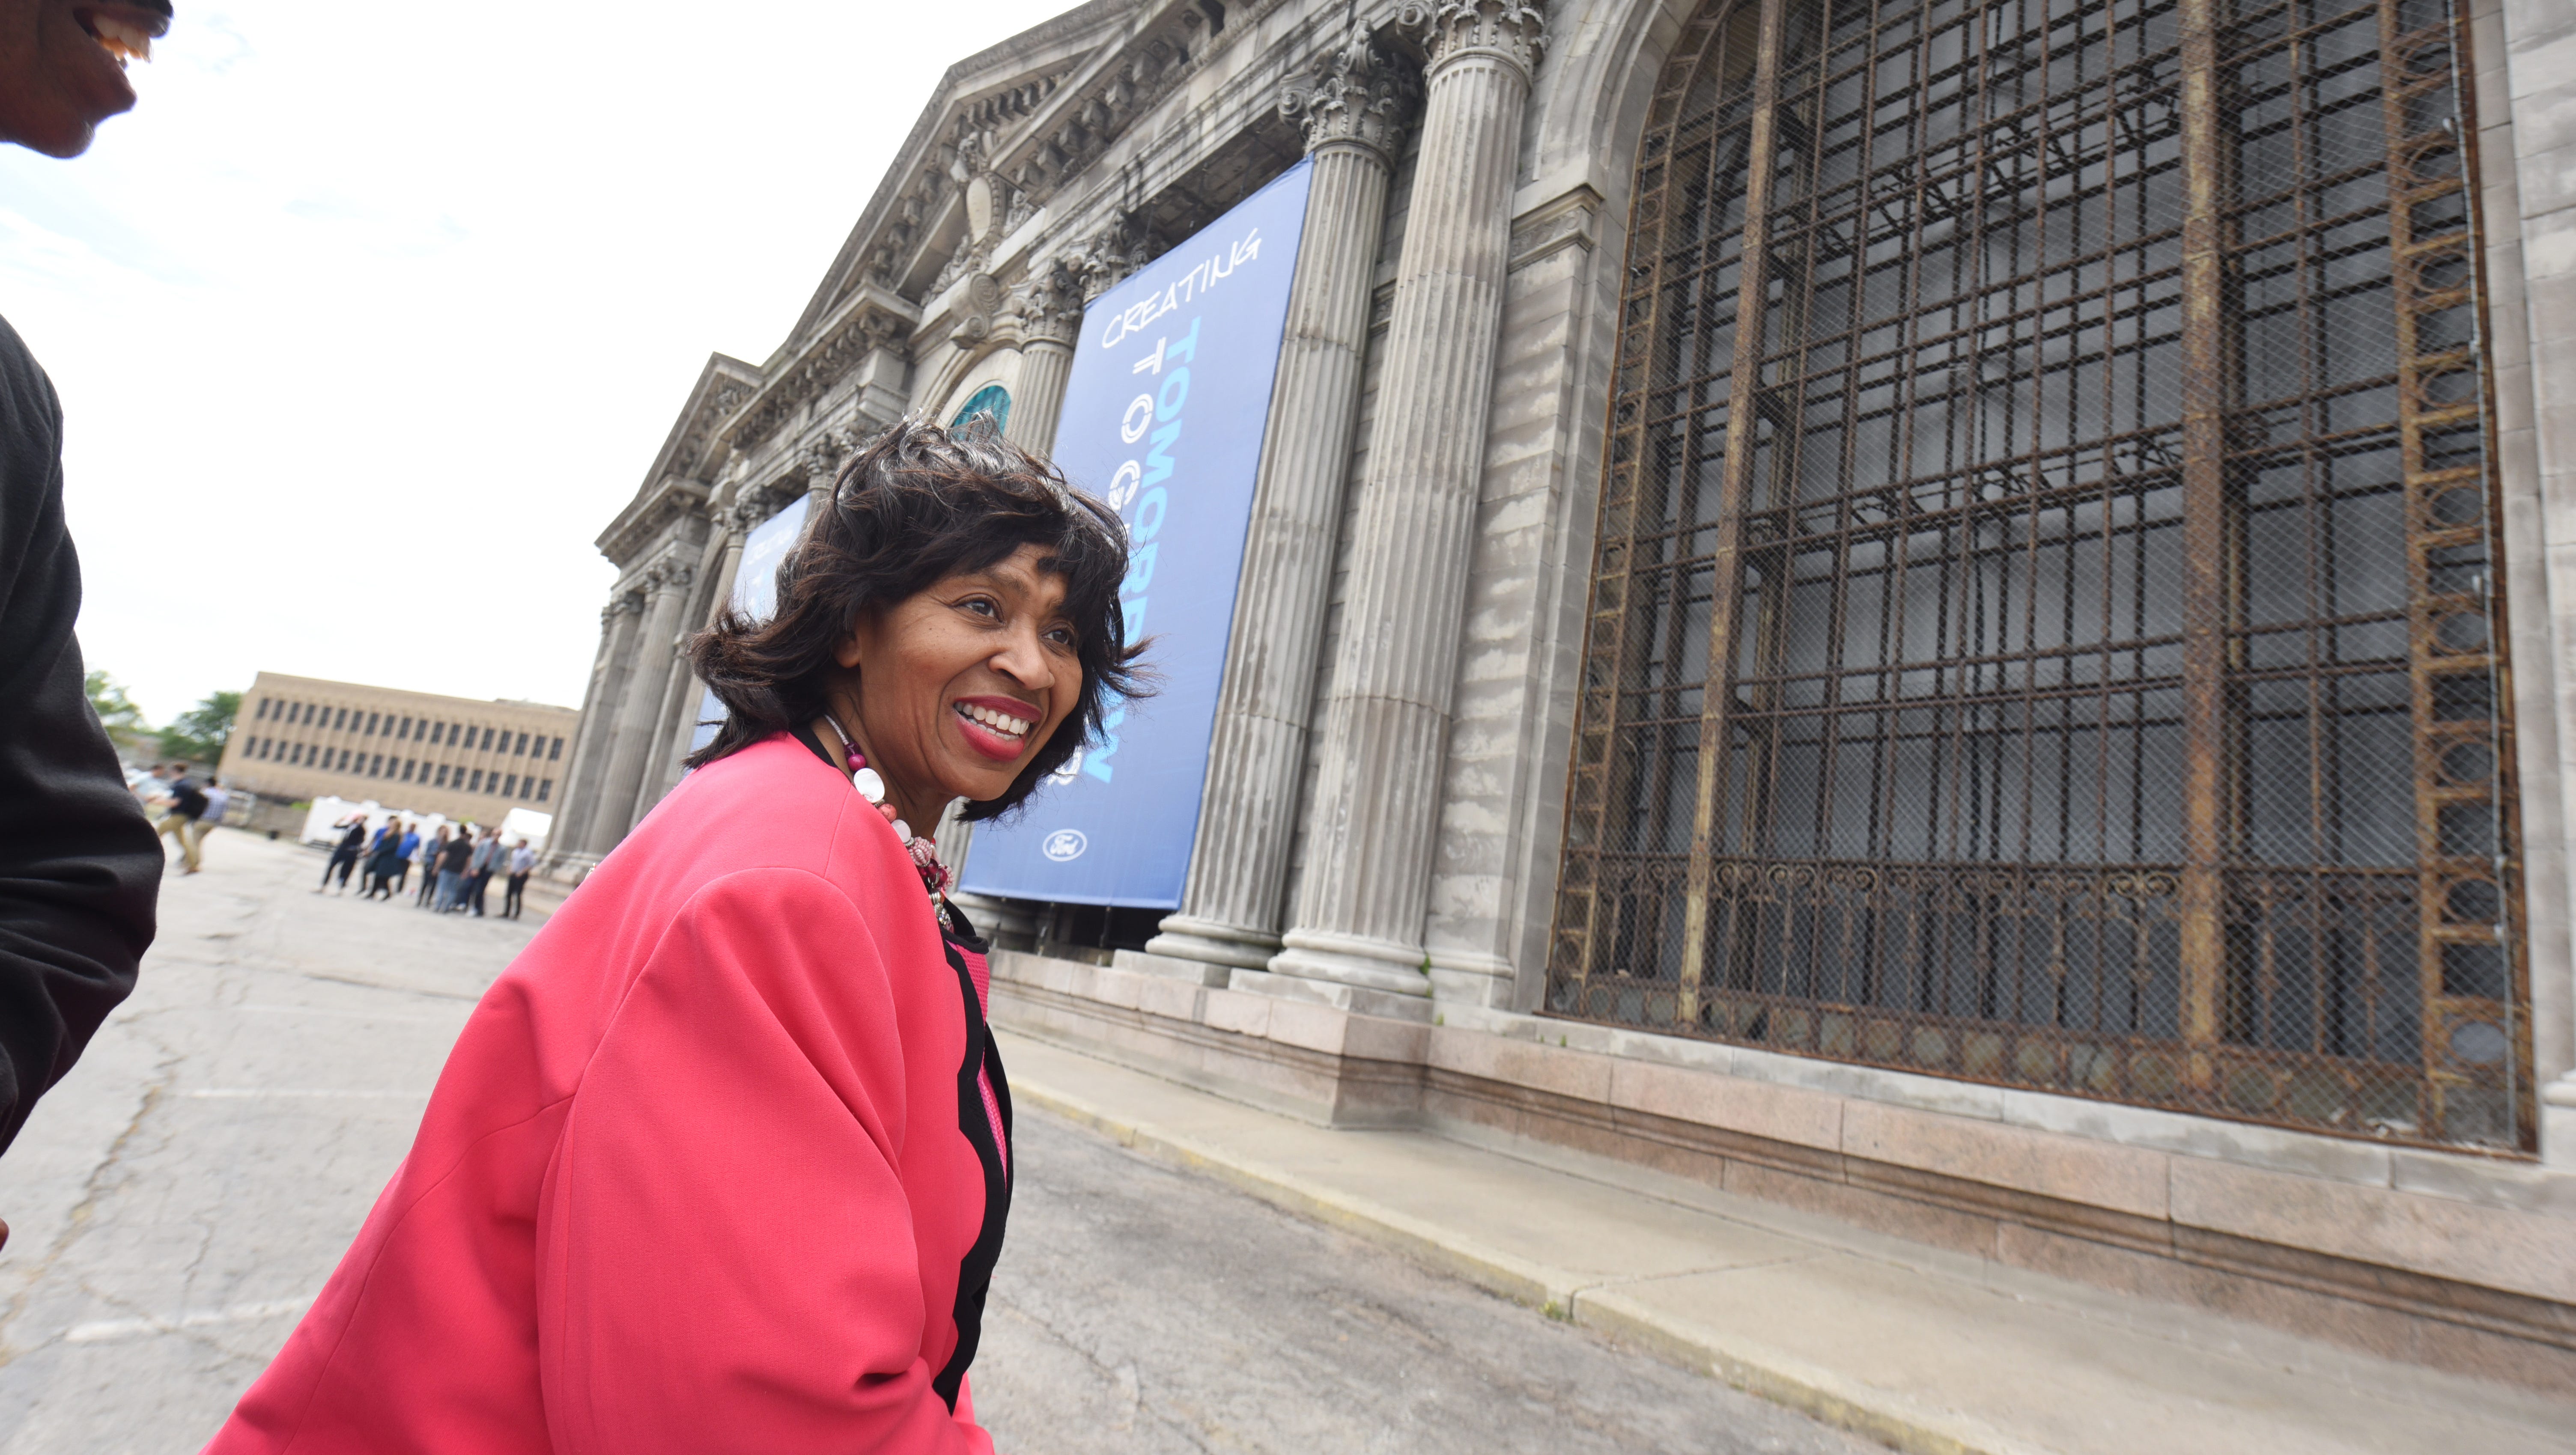 Detroit City Council President Brenda Jones leaves the Michigan Central Train Depot after her tour on Friday in Detroit.